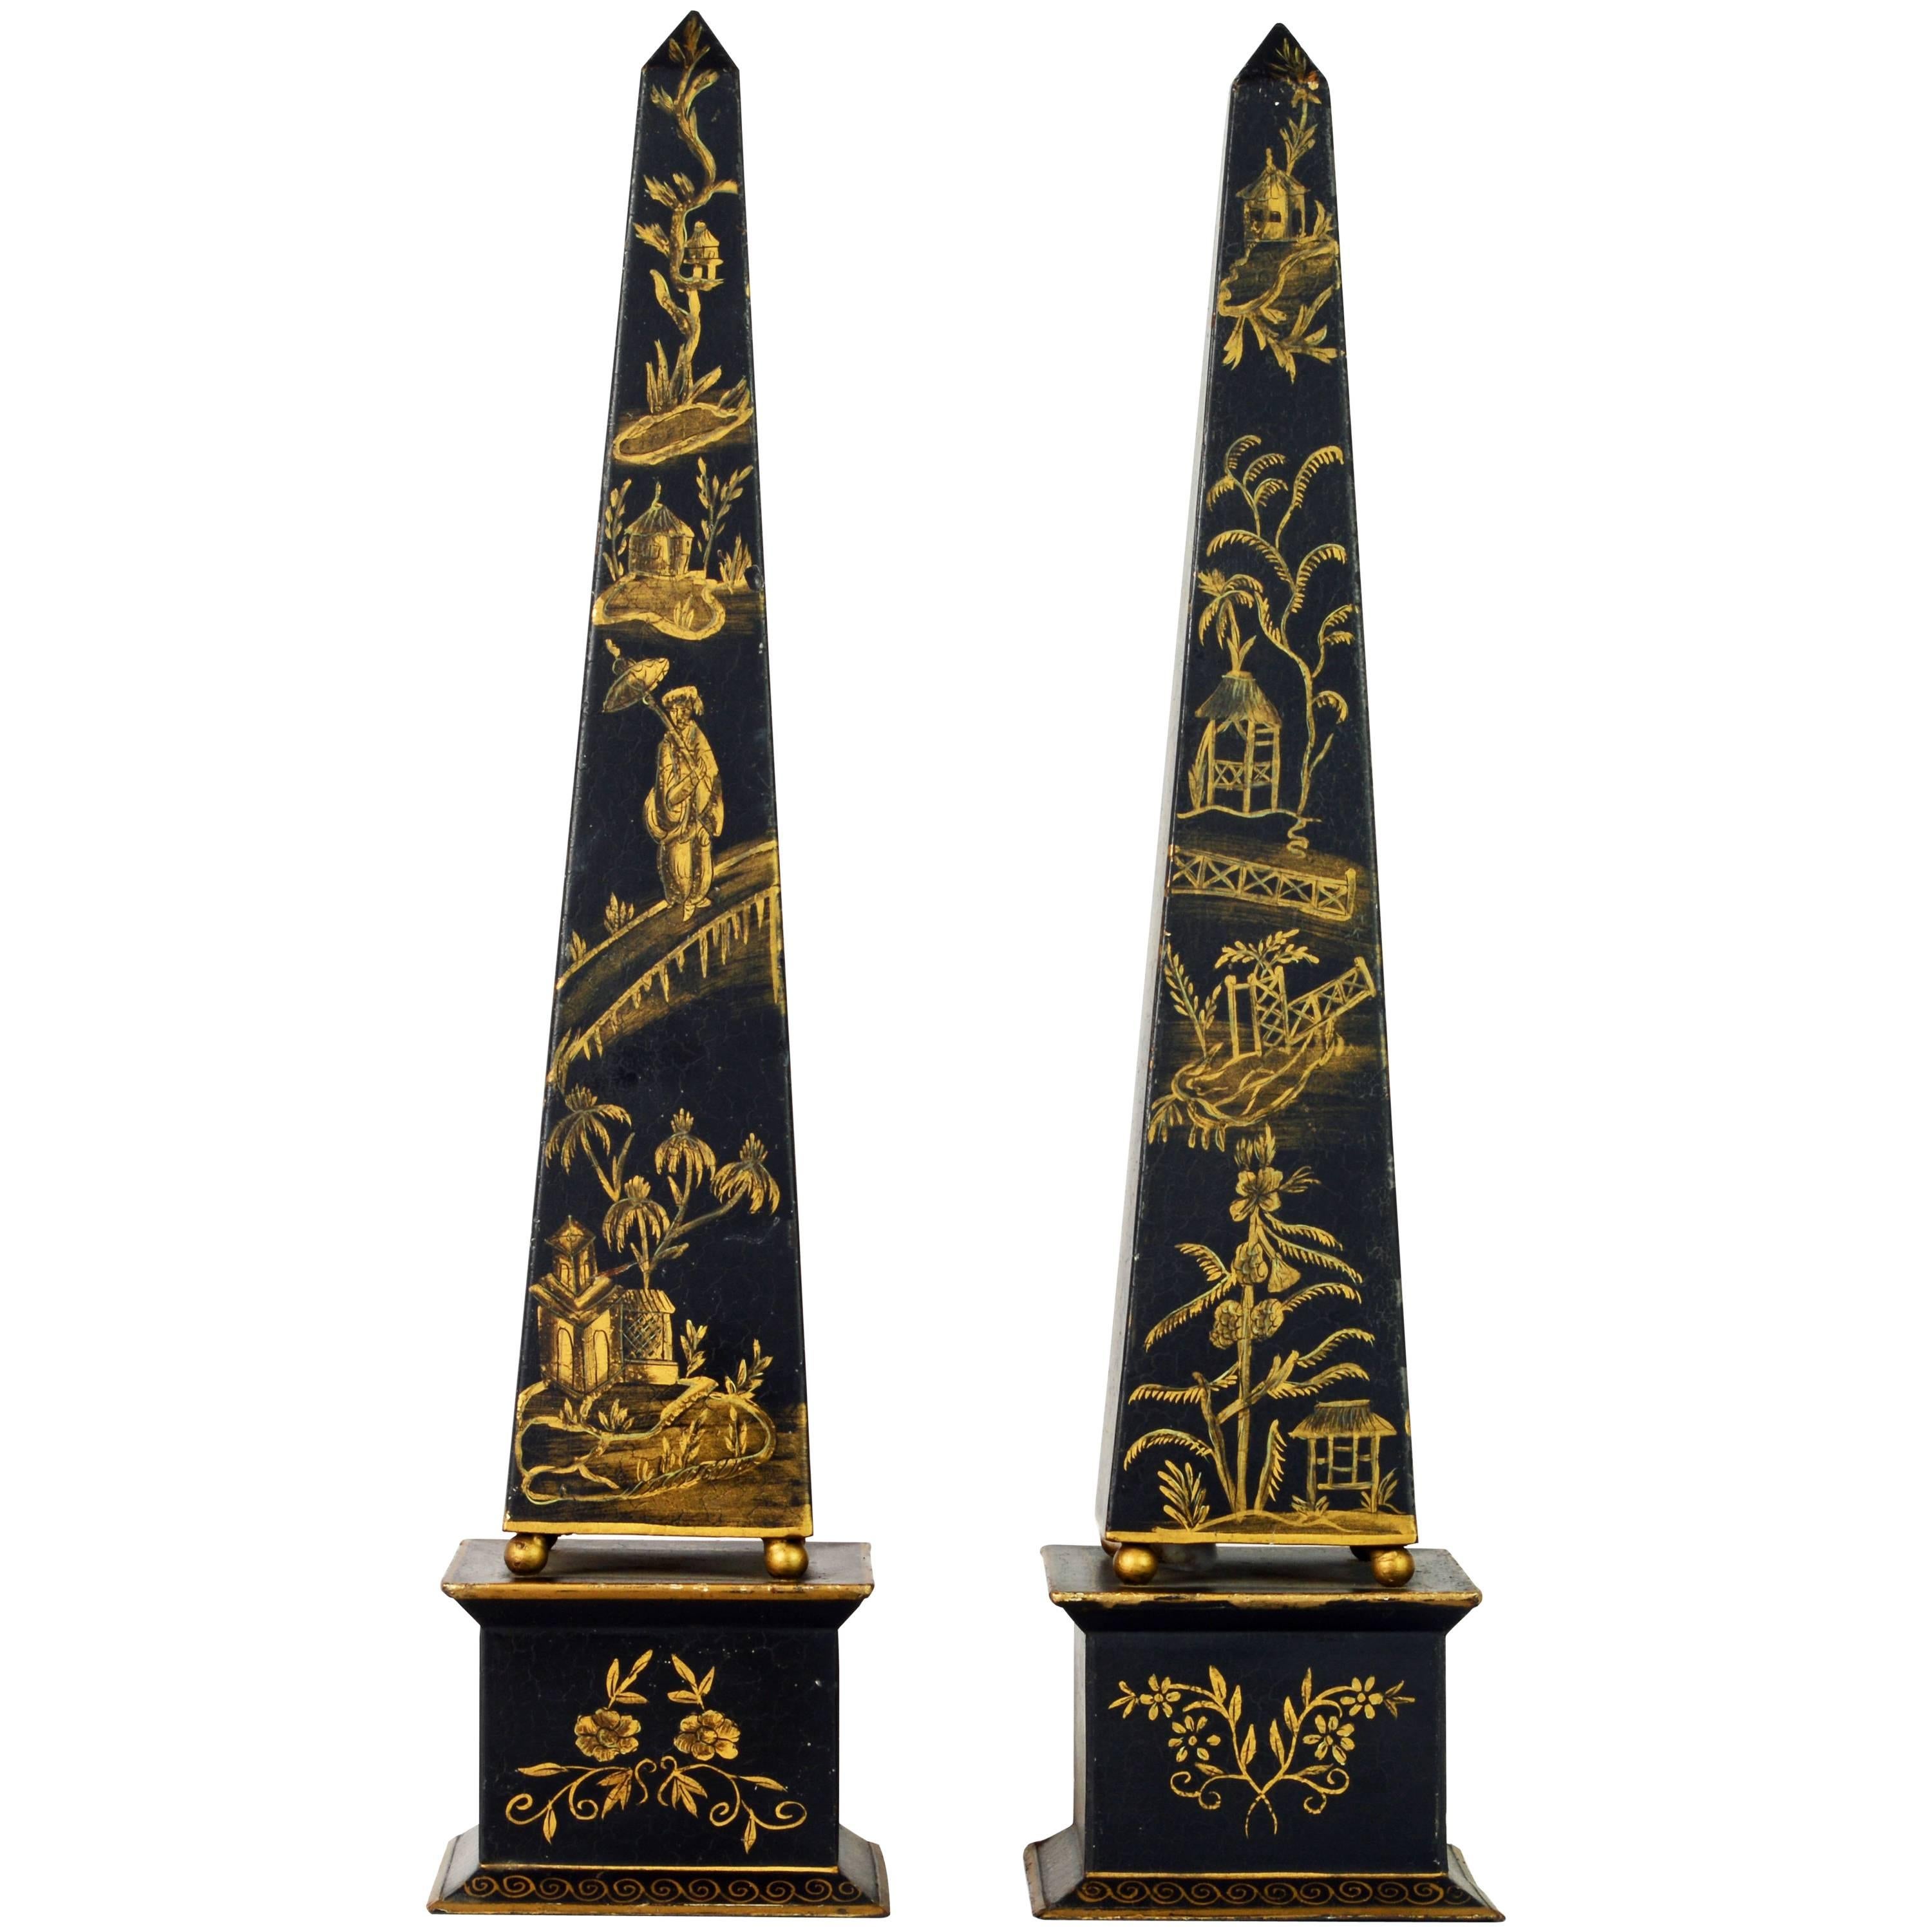 Pair of Tall Late 19th Century English Chinoiserie Painted Obelisk Models